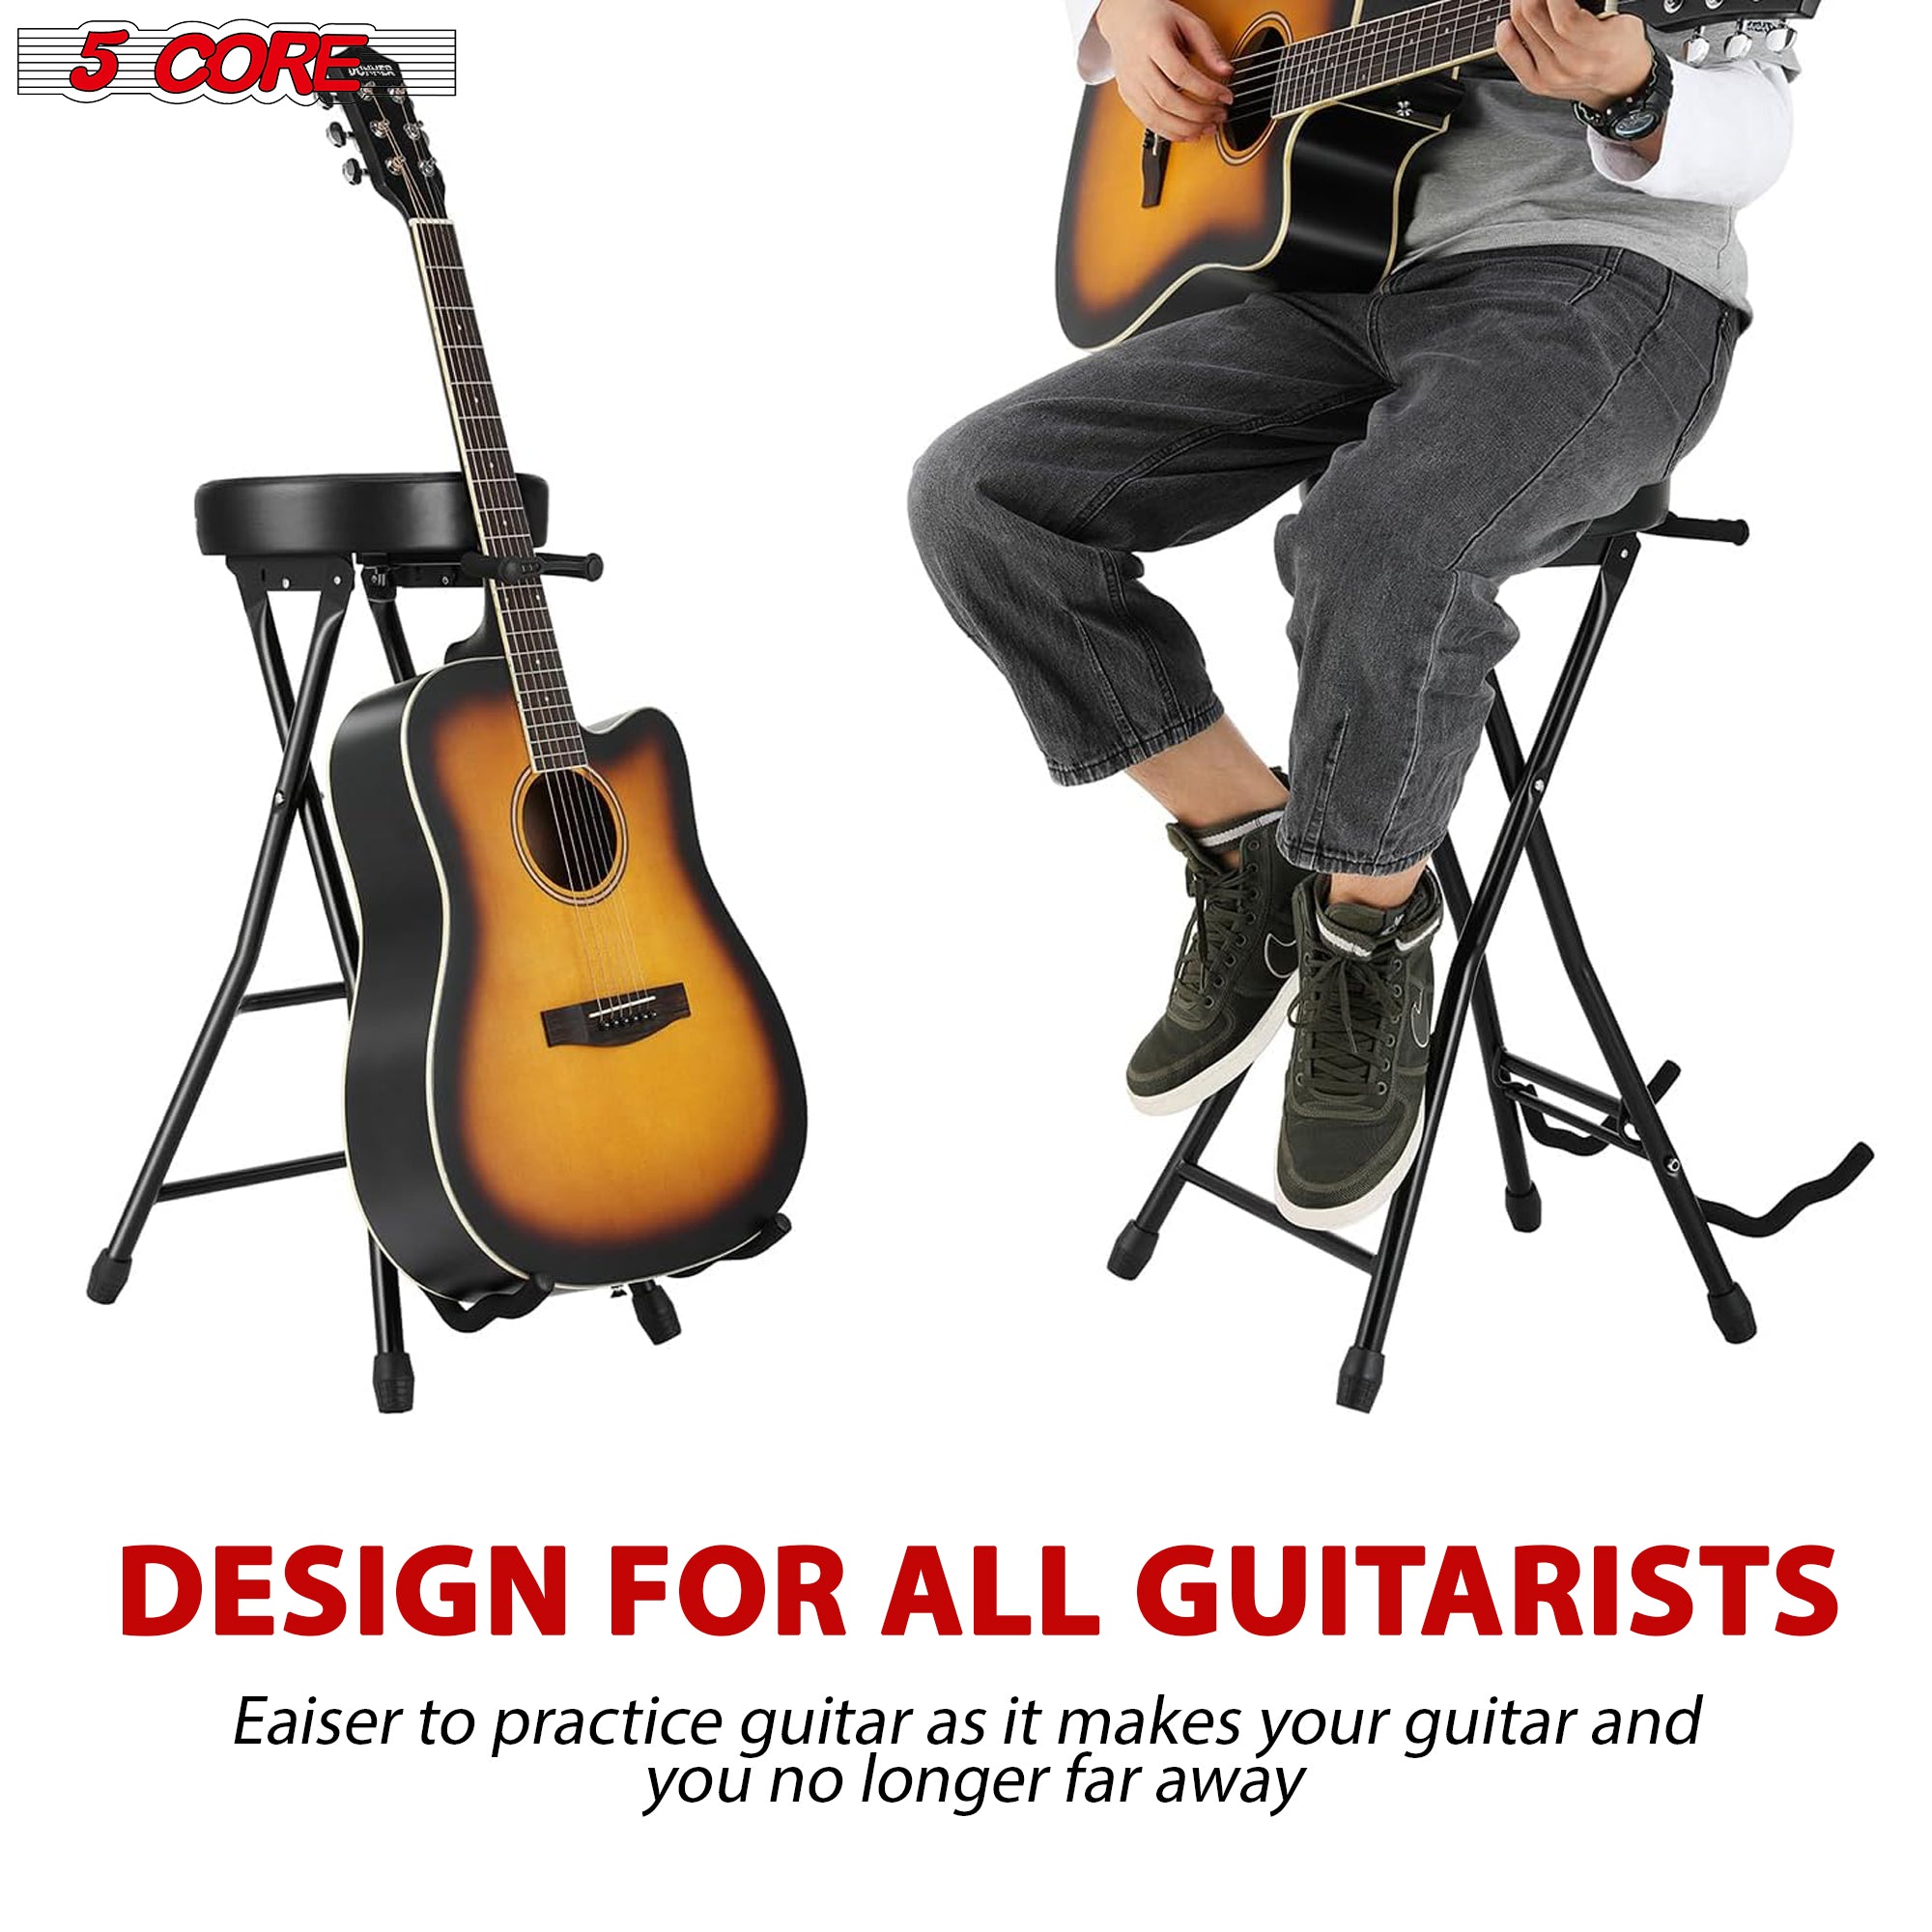 5 Core Guitar Stool Seat, Super Comfortable and Durable Guitar Stand Chair with Padded Guitar Holder for Guitar Players and Musicians- GSTOOL BLK